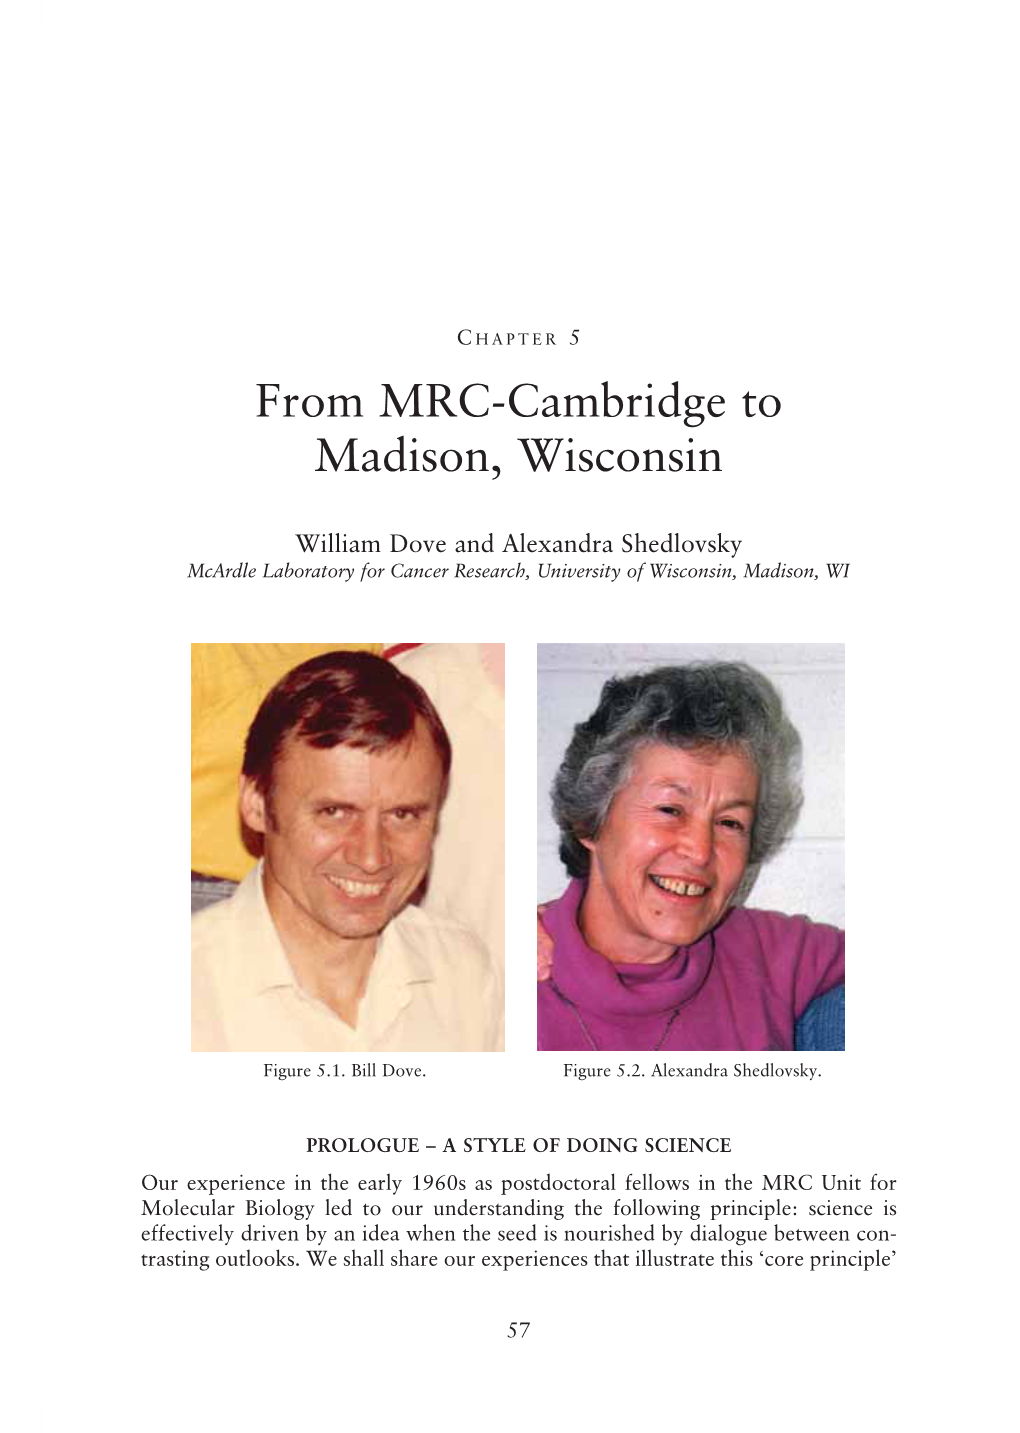 From MRC-Cambridge to Madison, Wisconsin